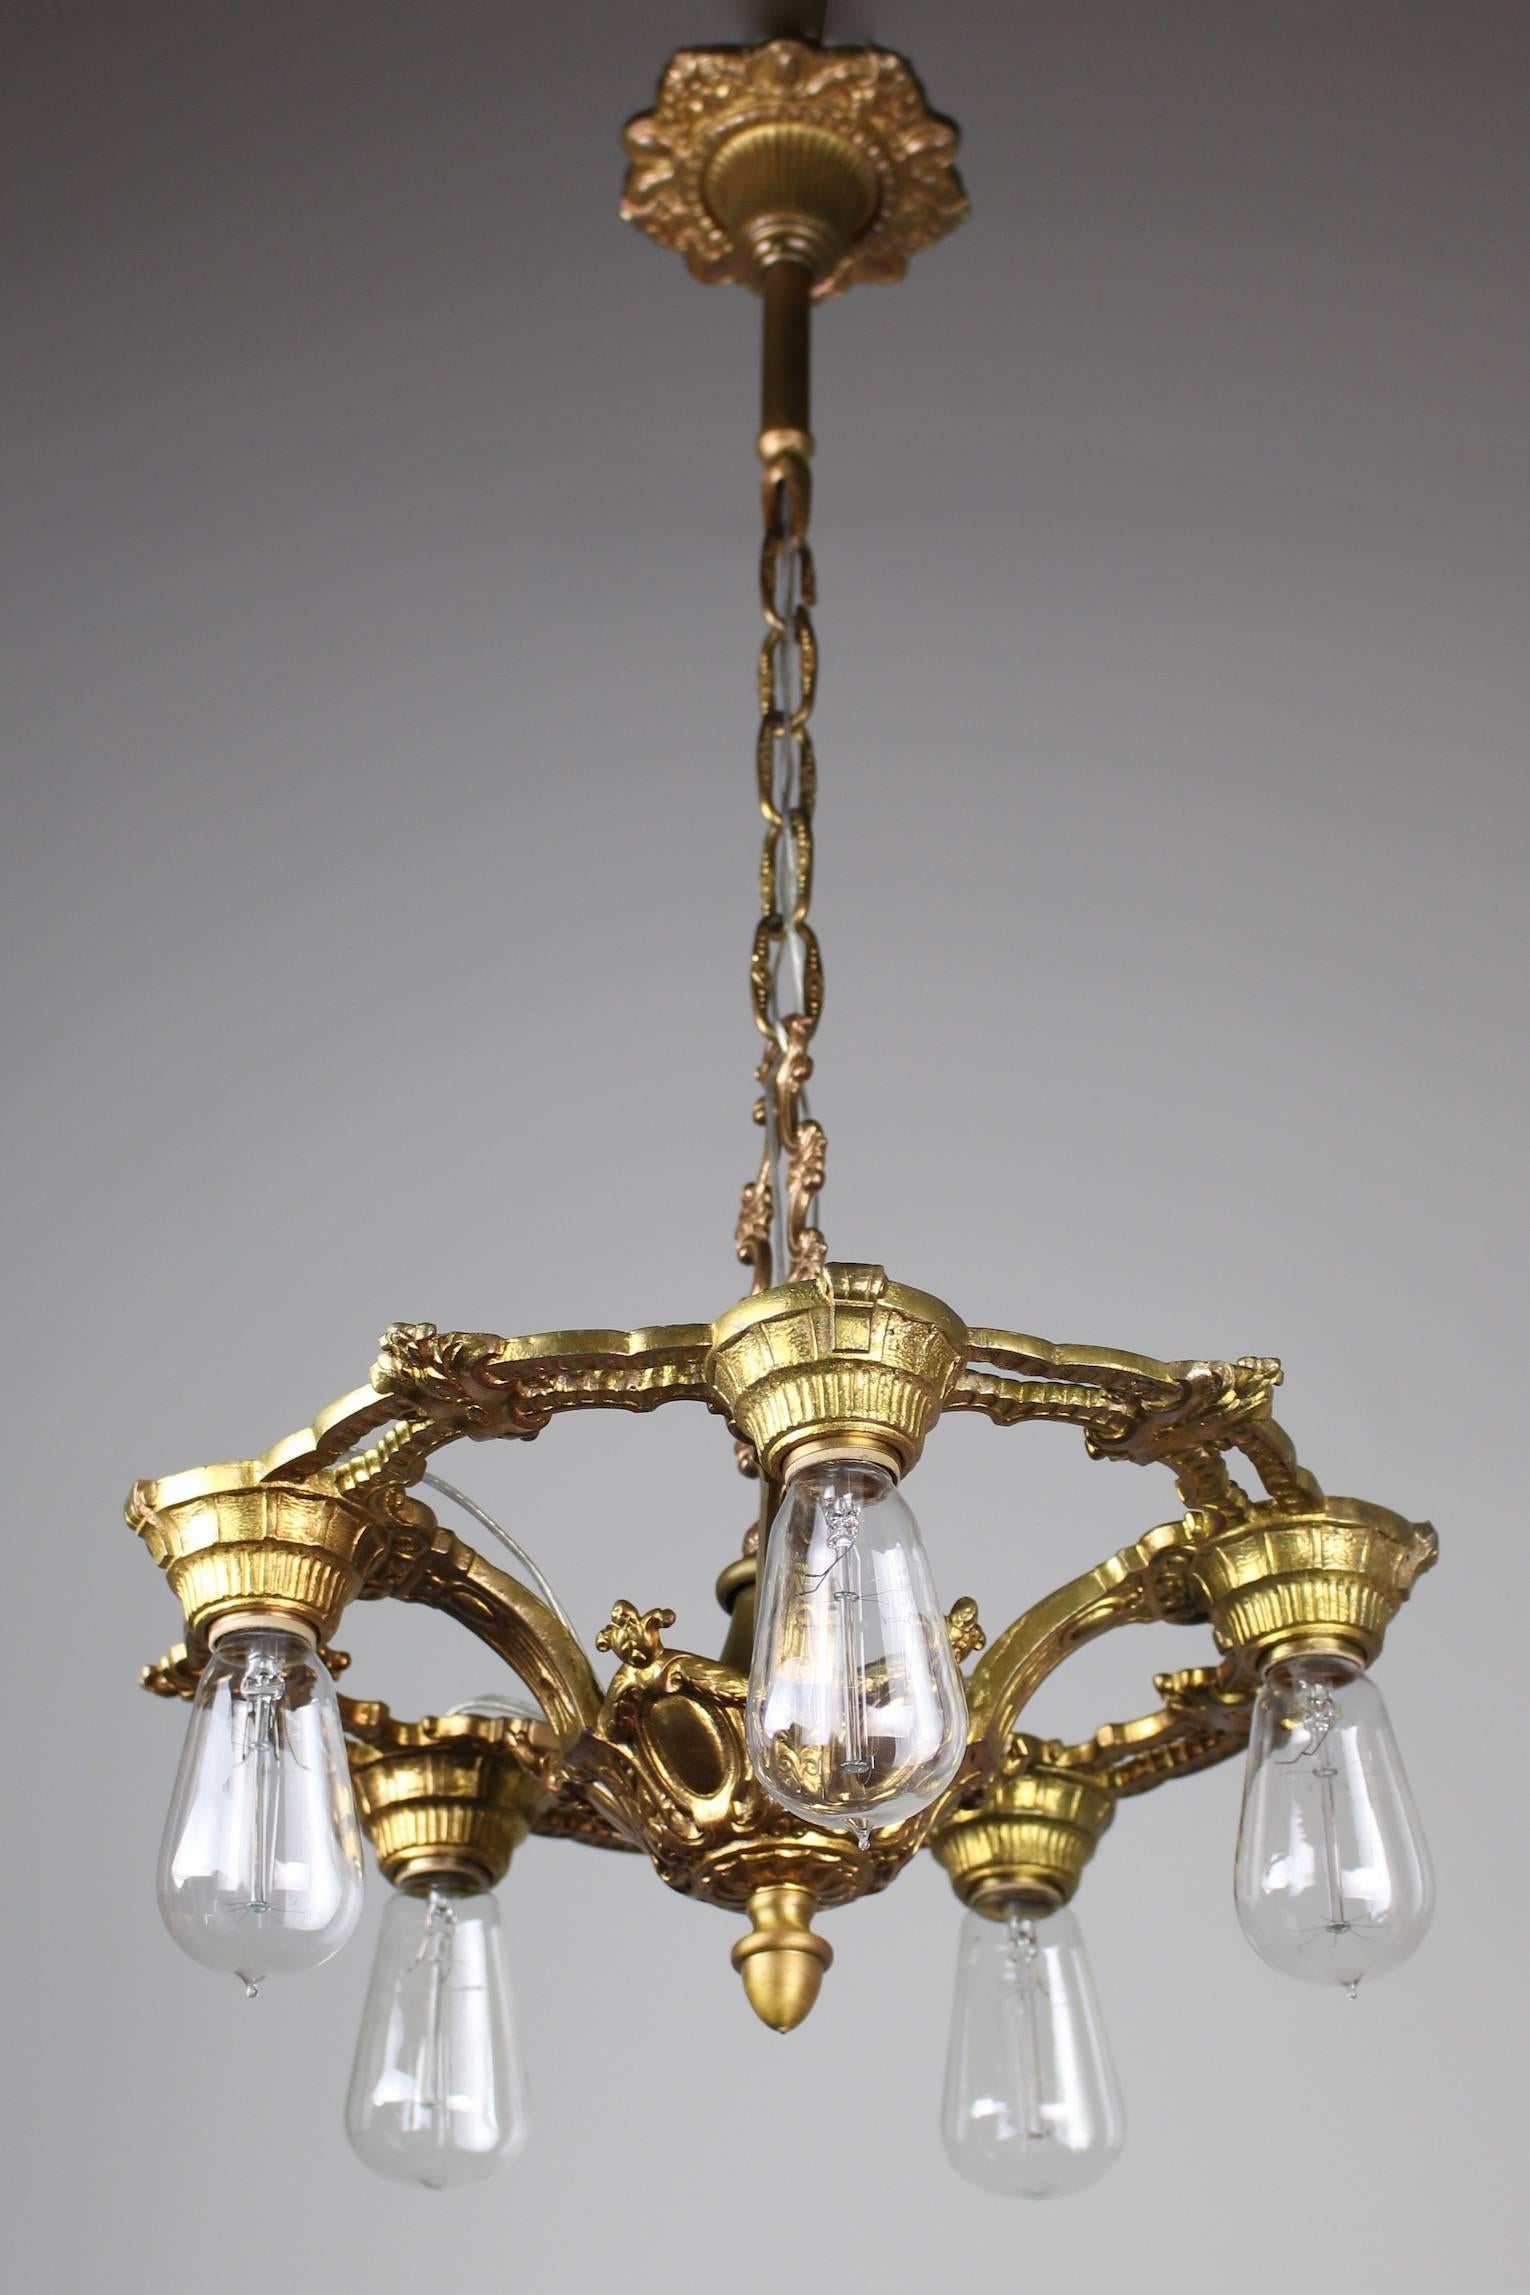 Circa. 1920 This is a lovely cast brass dining room light fixture done in the neoclassical style. Perfectly suitable to 